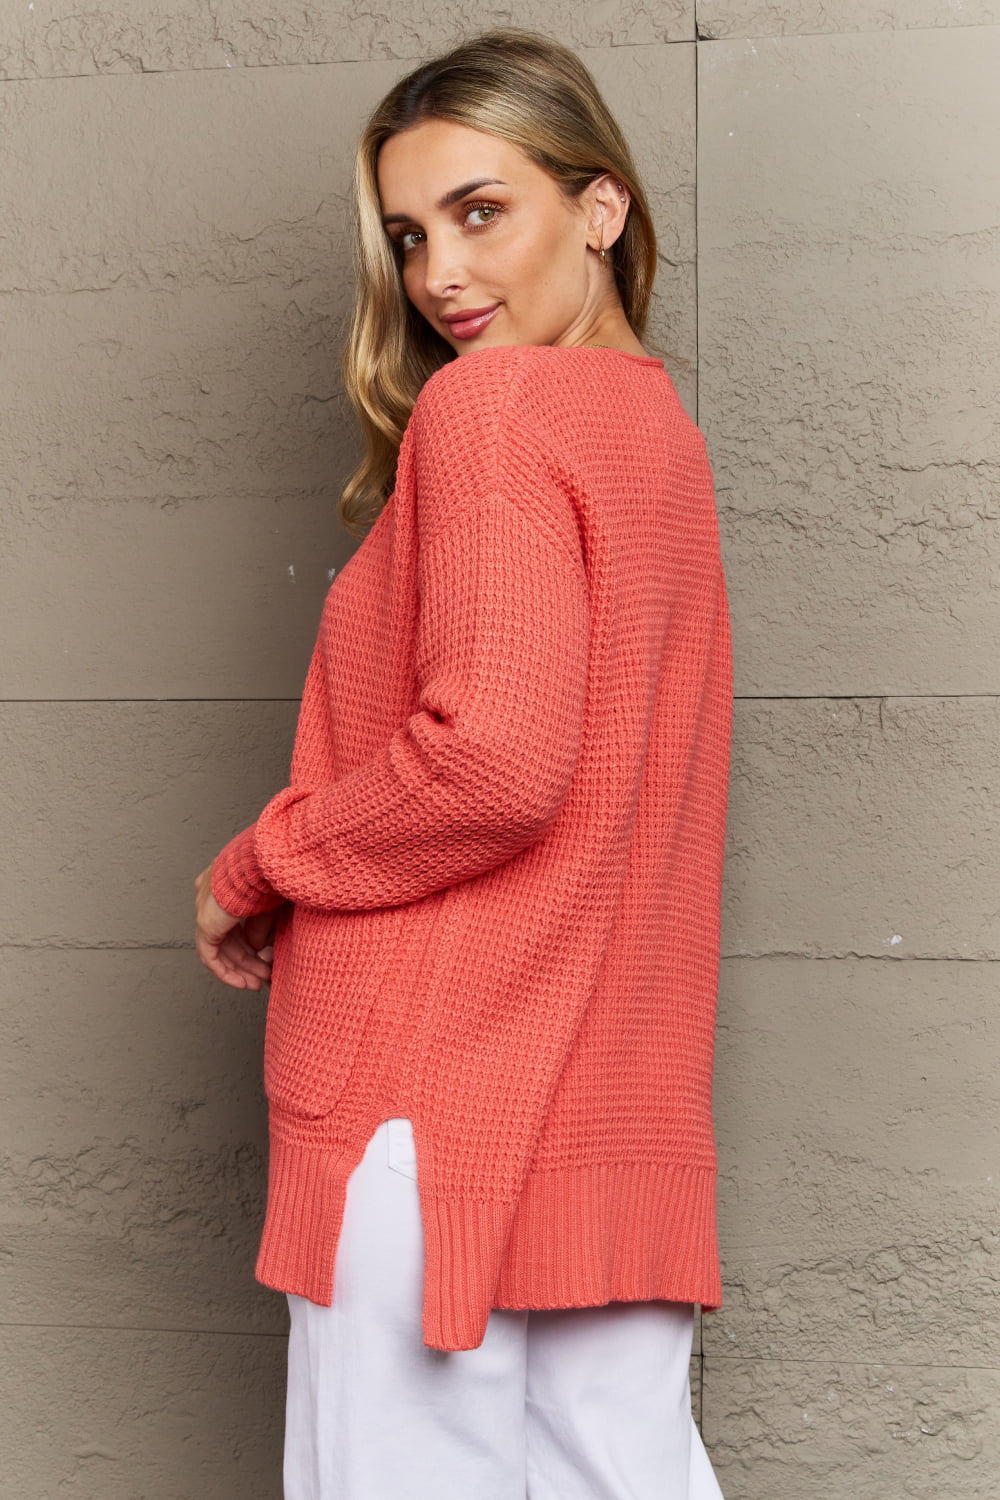 Bright & Cozy Full Size Waffle Knit Cardigan - Women’s Clothing & Accessories - Shirts & Tops - 3 - 2024